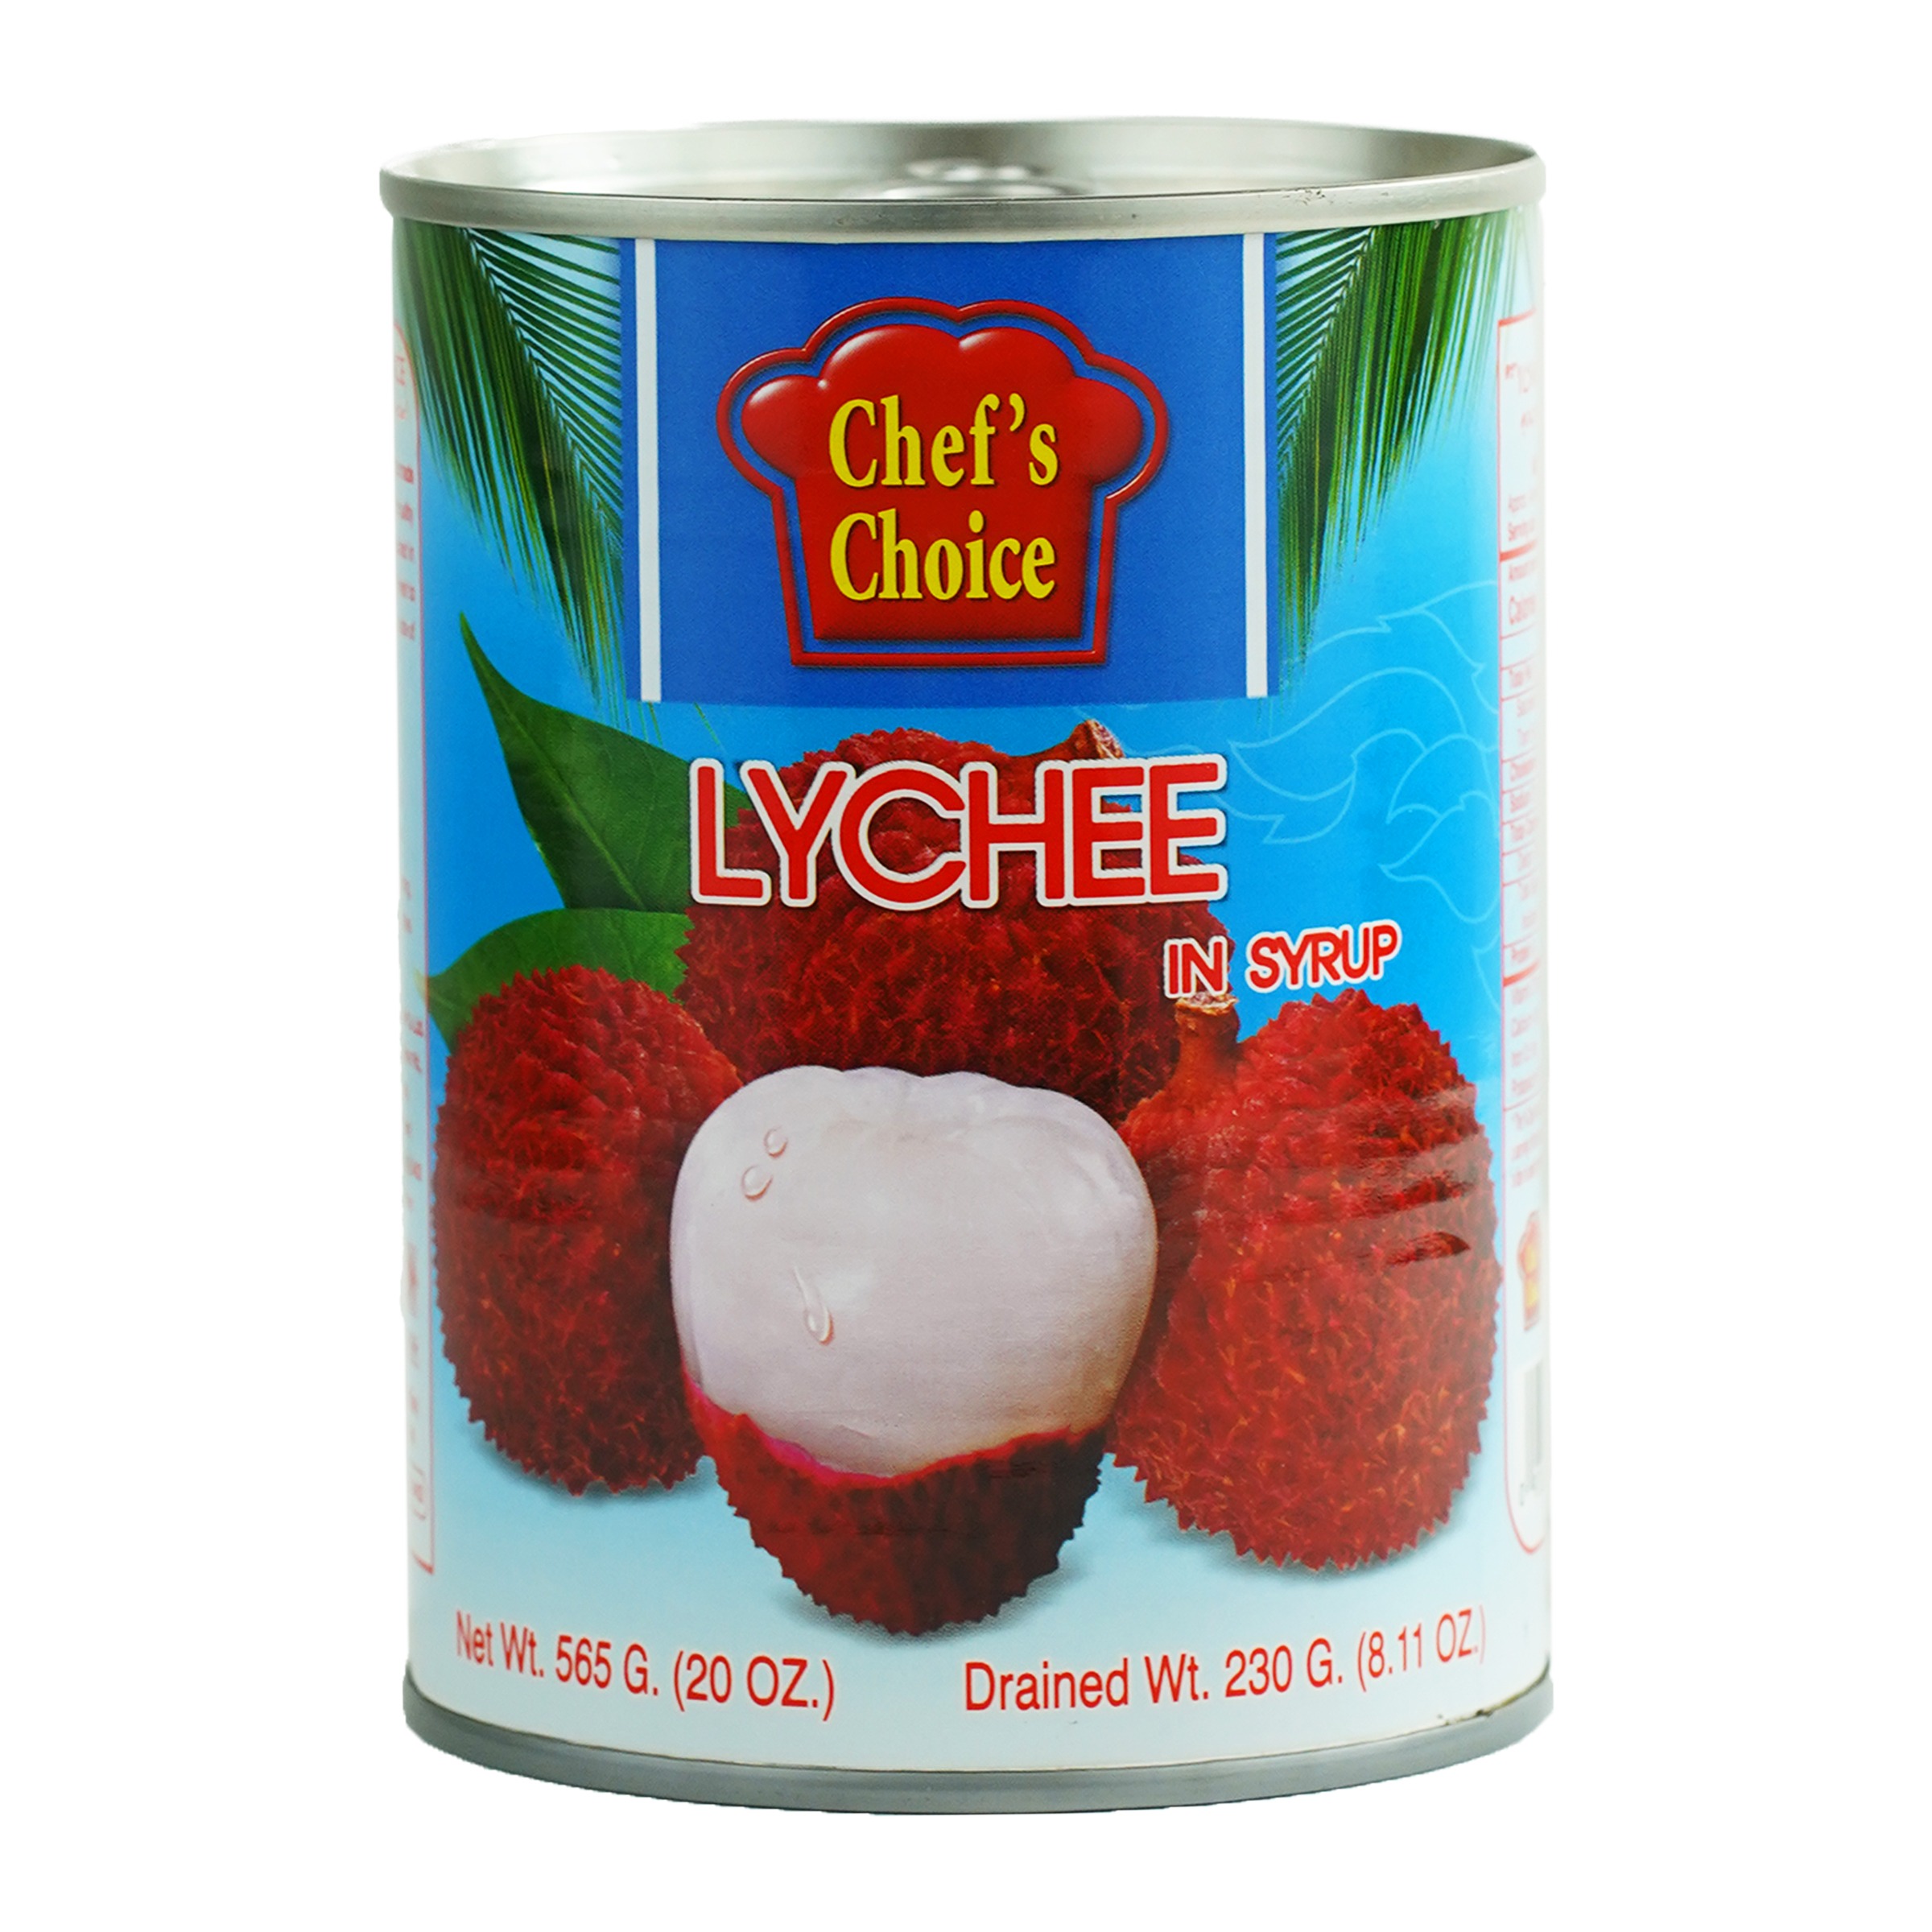 Chef's Choice Lychee in Syrup, 20 oz (24-Count) - VIFON